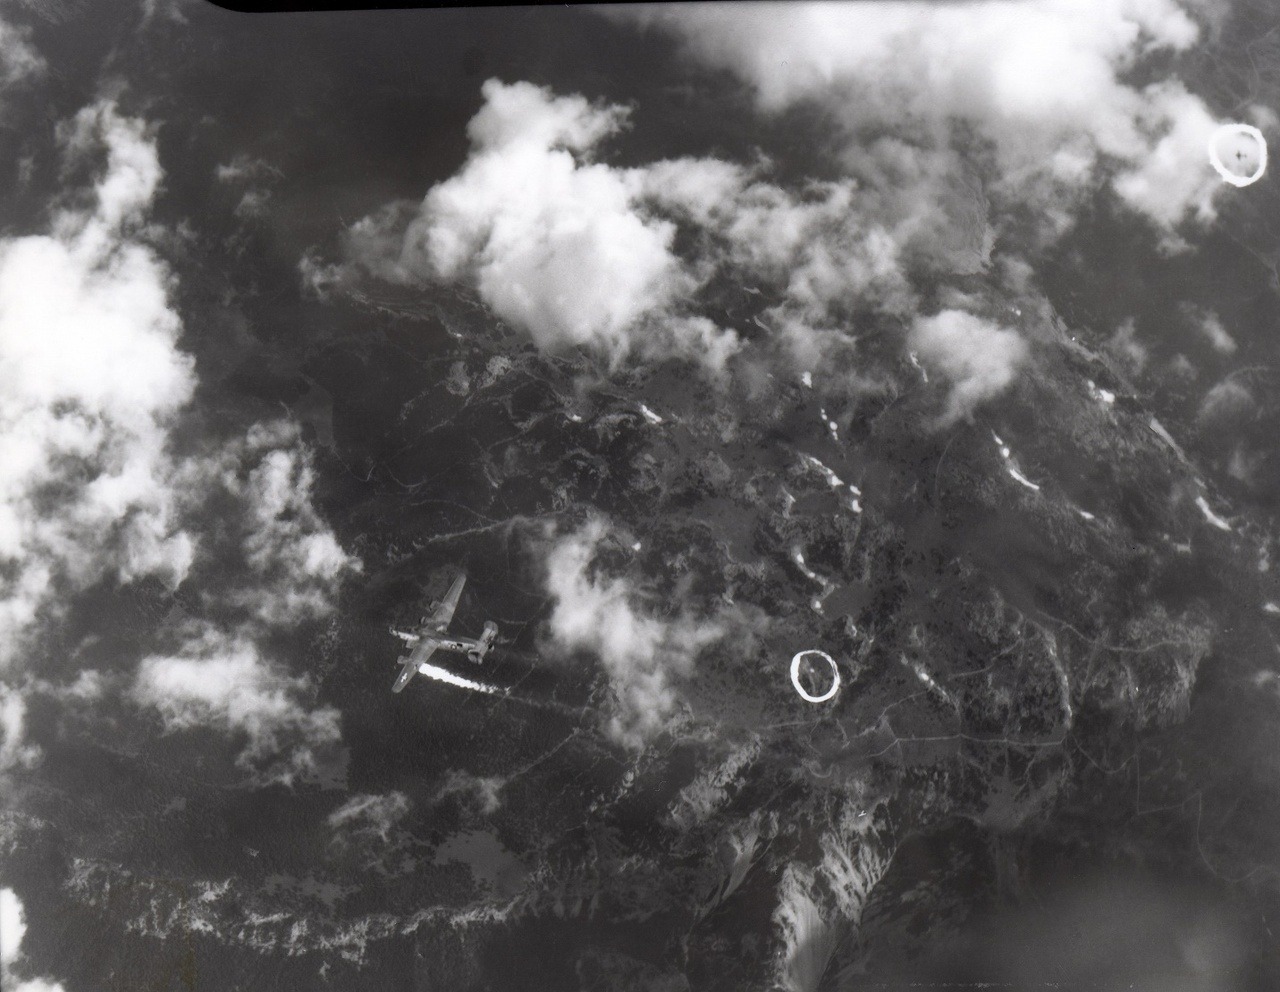 B-24 Extra Joker falls out of formation